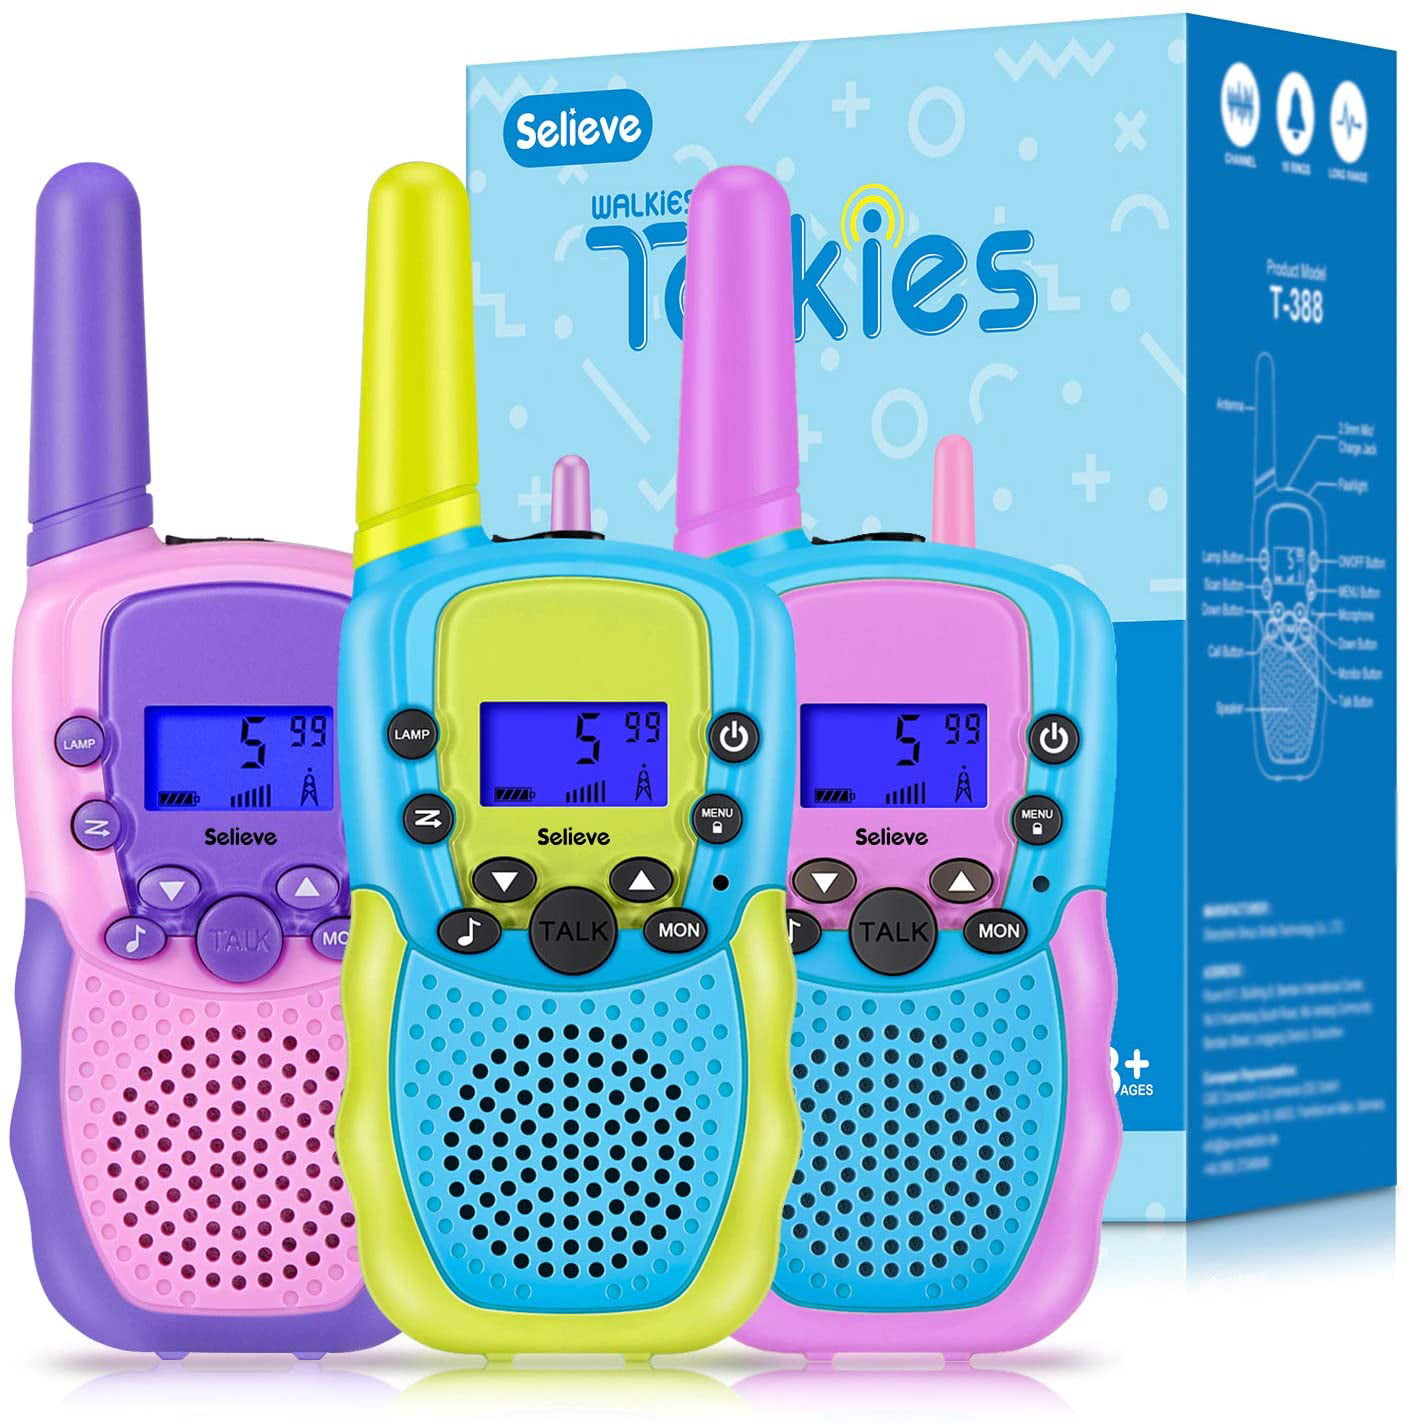 Toys for 3-12 Year Old Boys BIBOYELF Walkie Talkies for Kids Toys for 3-12 Year Old Girls,5-9 Year Old Girl Birthday Gift,Outside Toys for Kids Outdoor Play,HK-688 1Pair Pink 